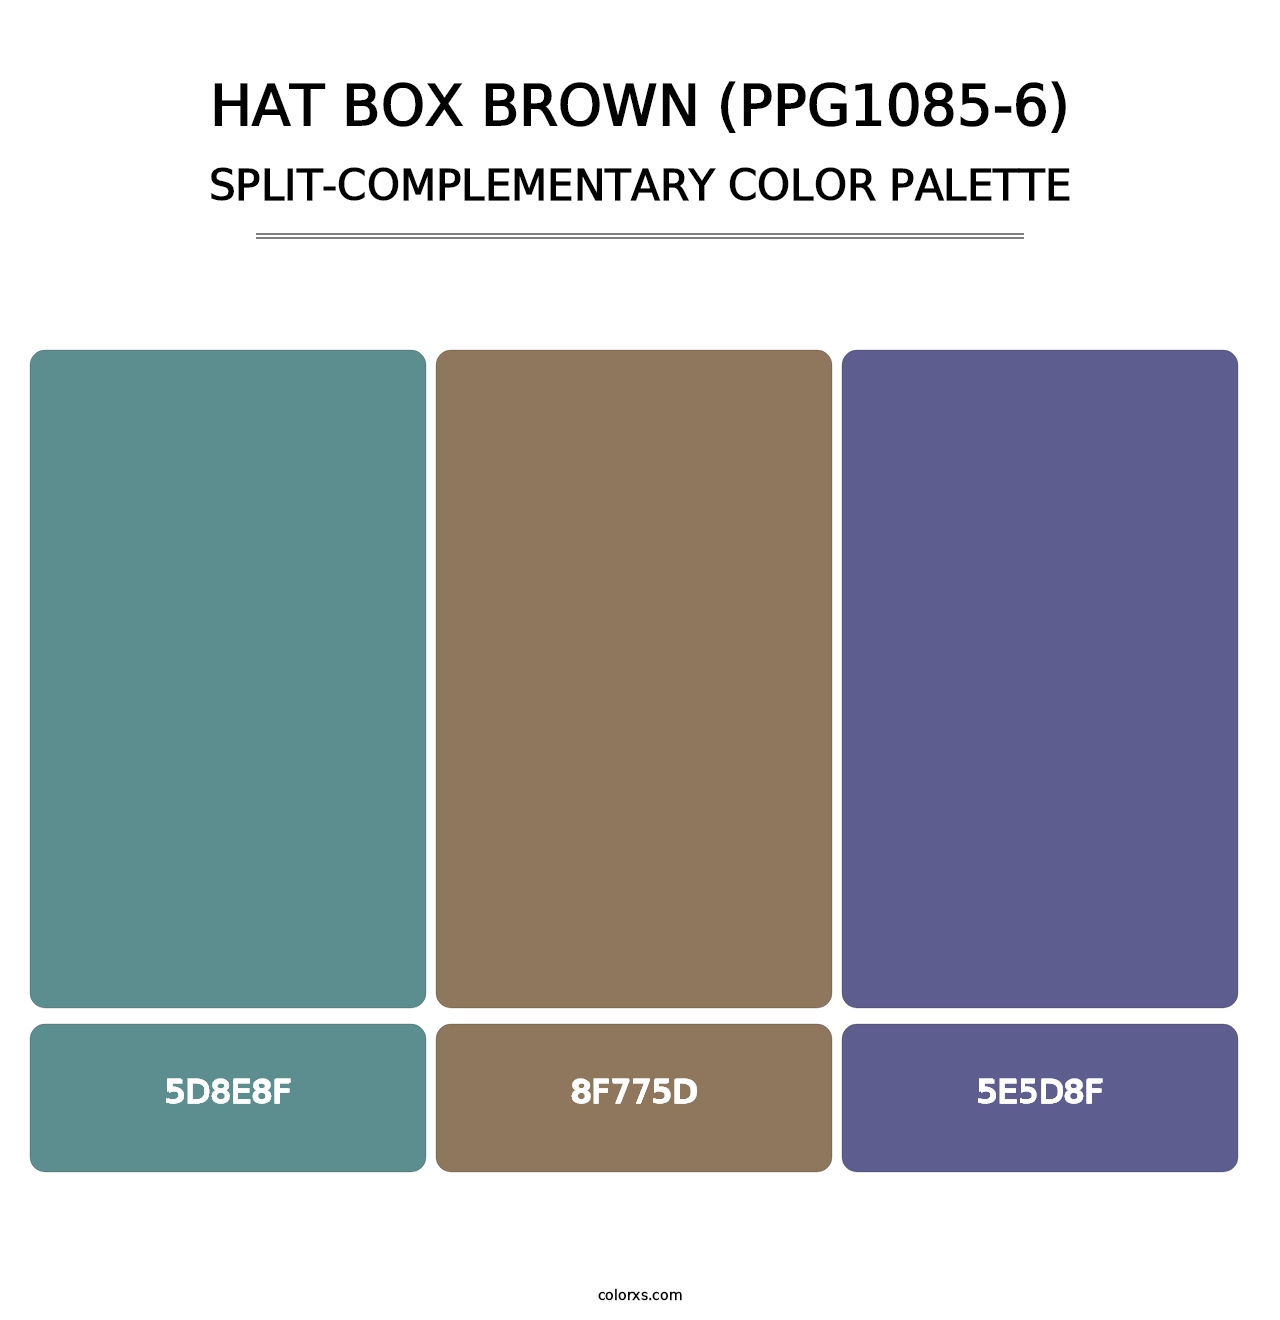 Hat Box Brown (PPG1085-6) - Split-Complementary Color Palette